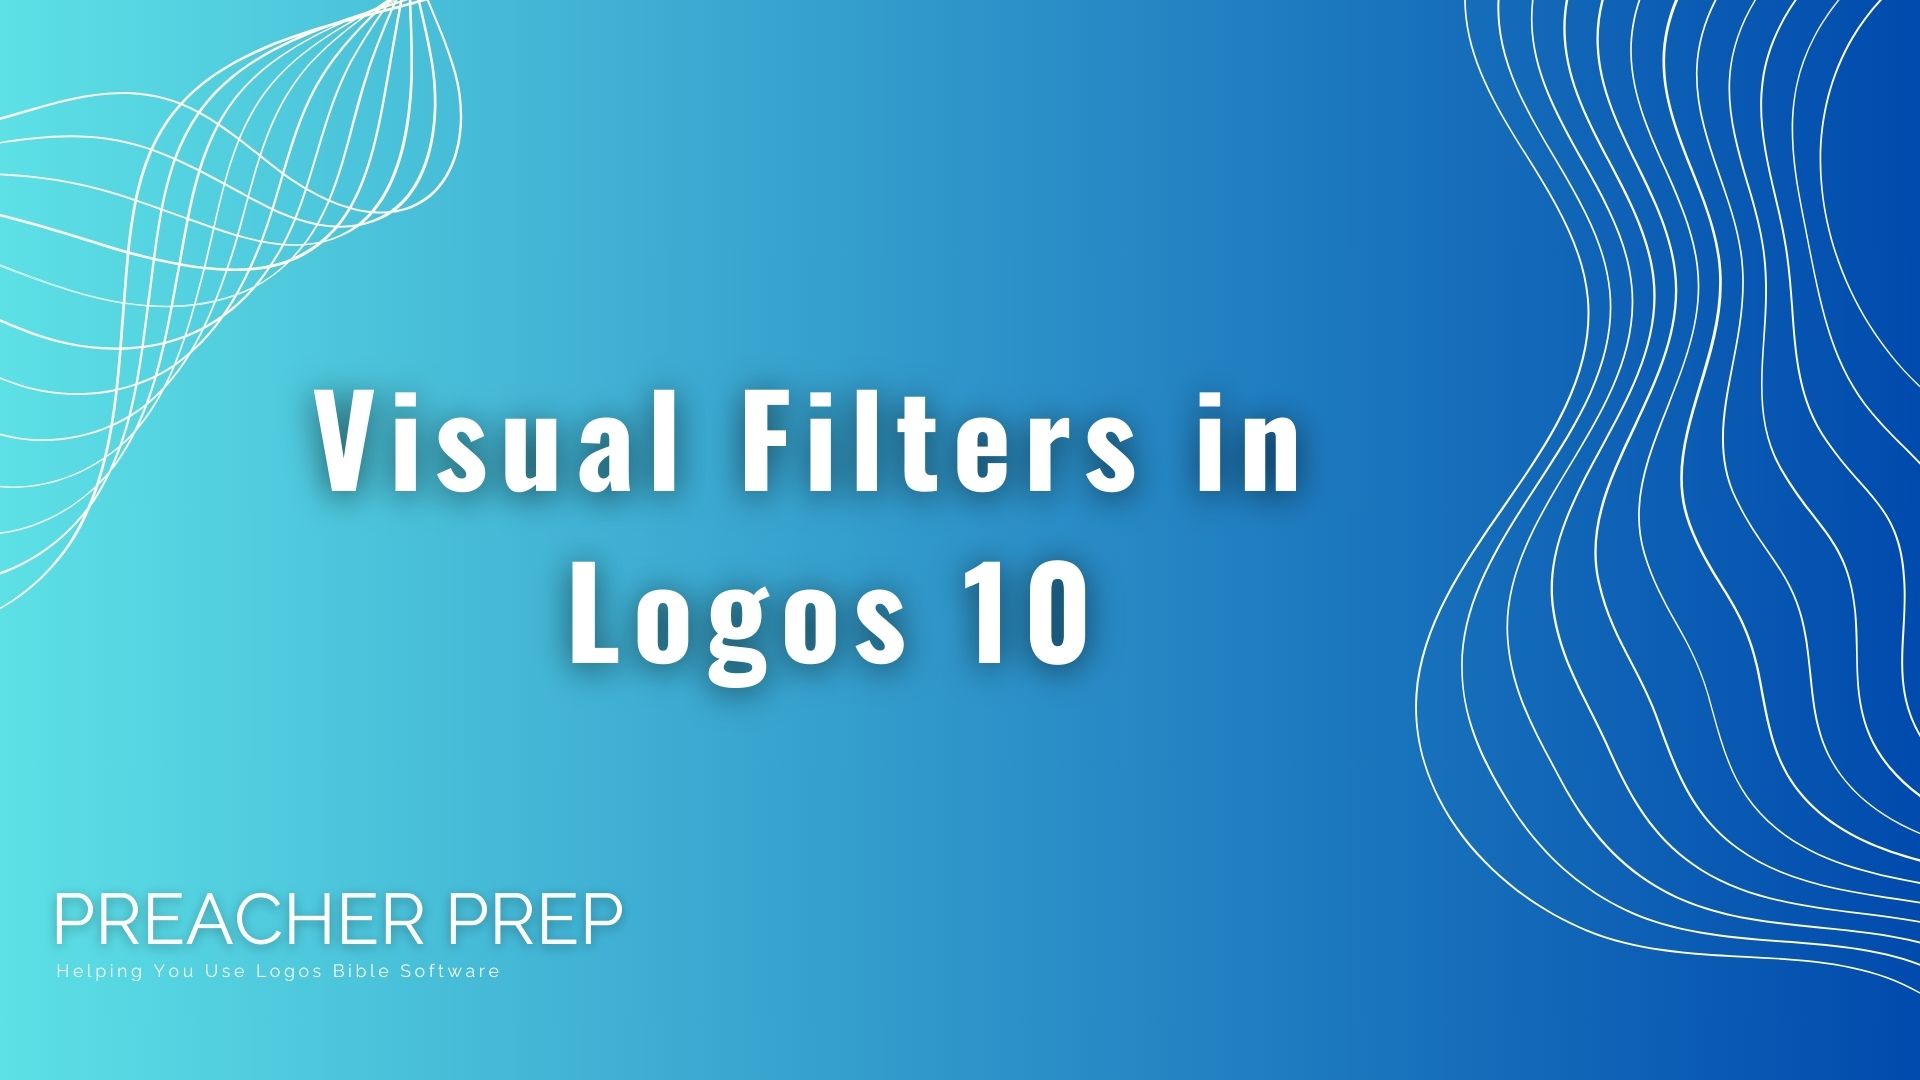 Making the Most out of Visual Filters